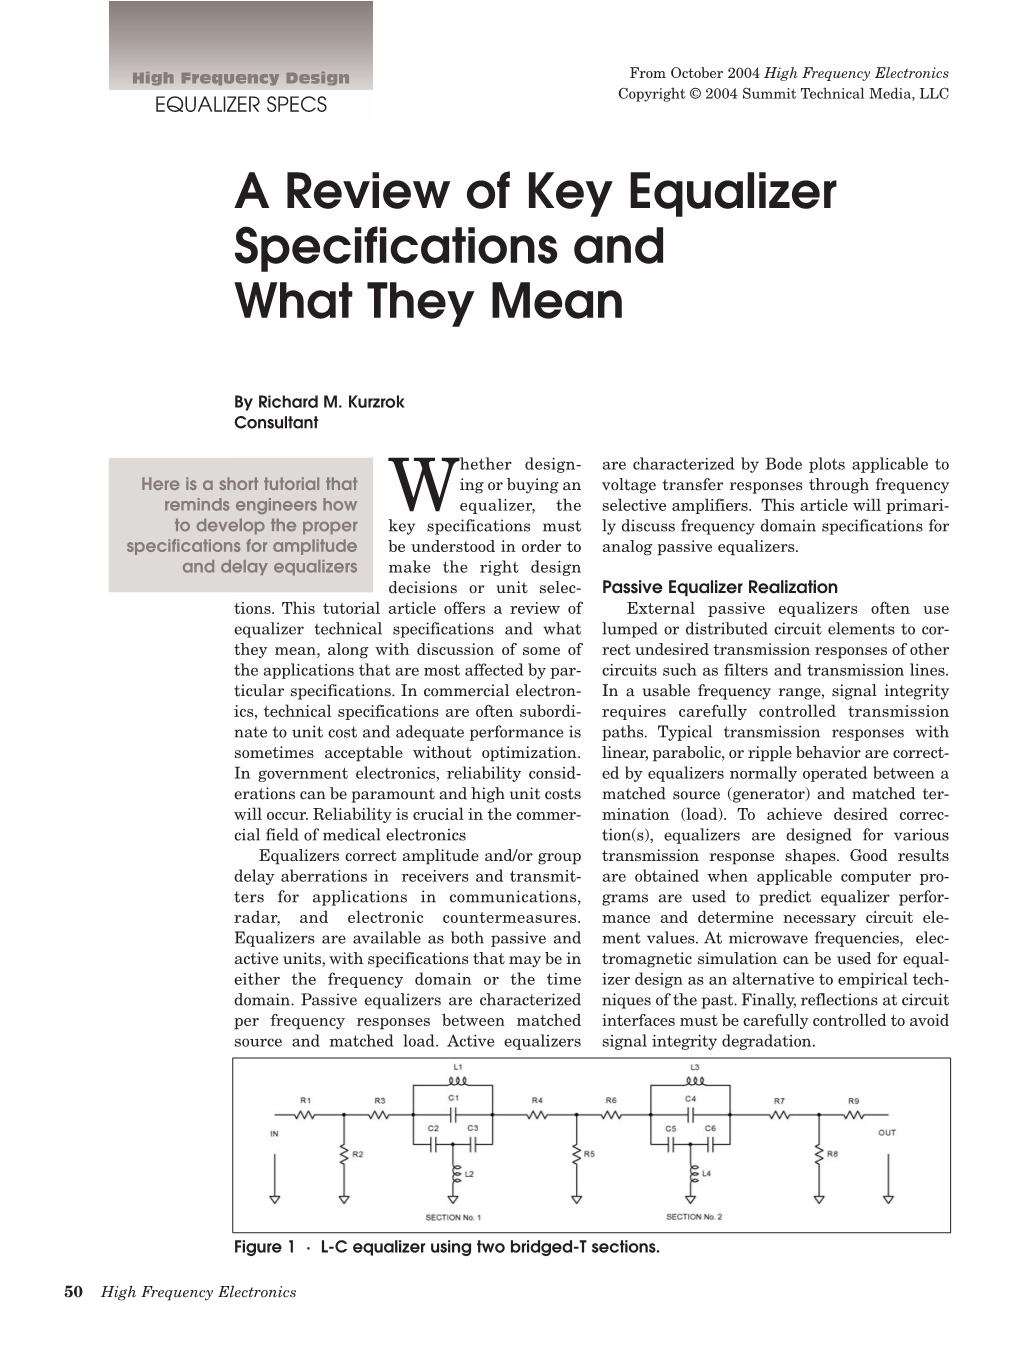 A Review of Key Equalizer Specifications and What They Mean